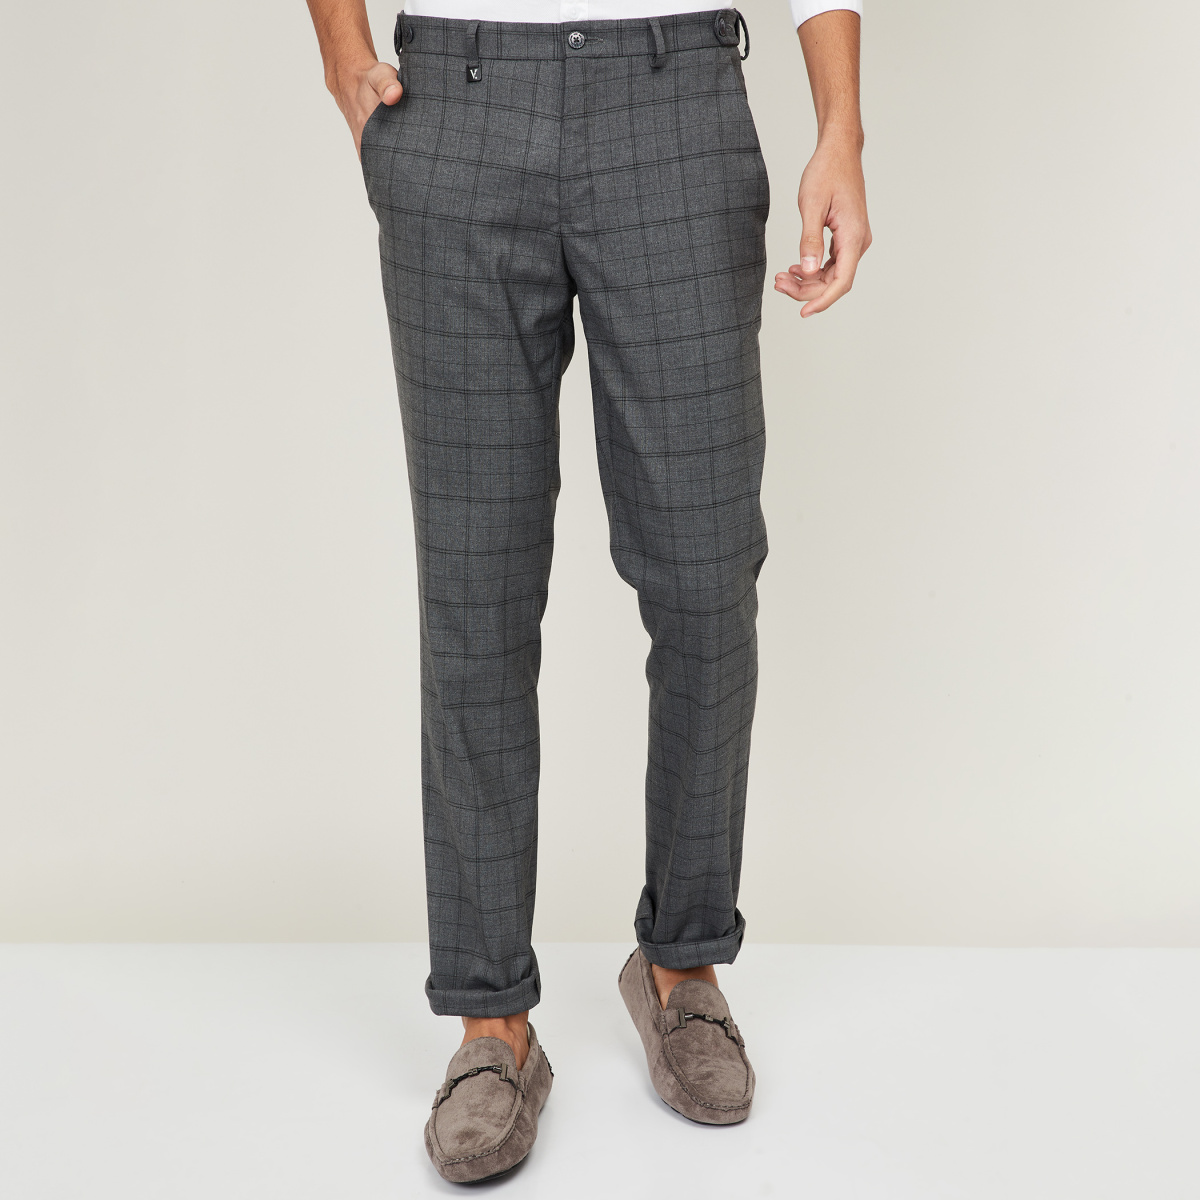 TitleNine Sky Blue Checked Trouser for men/ Casual Check Pants/Slim Fit Check  pants/Cotton check